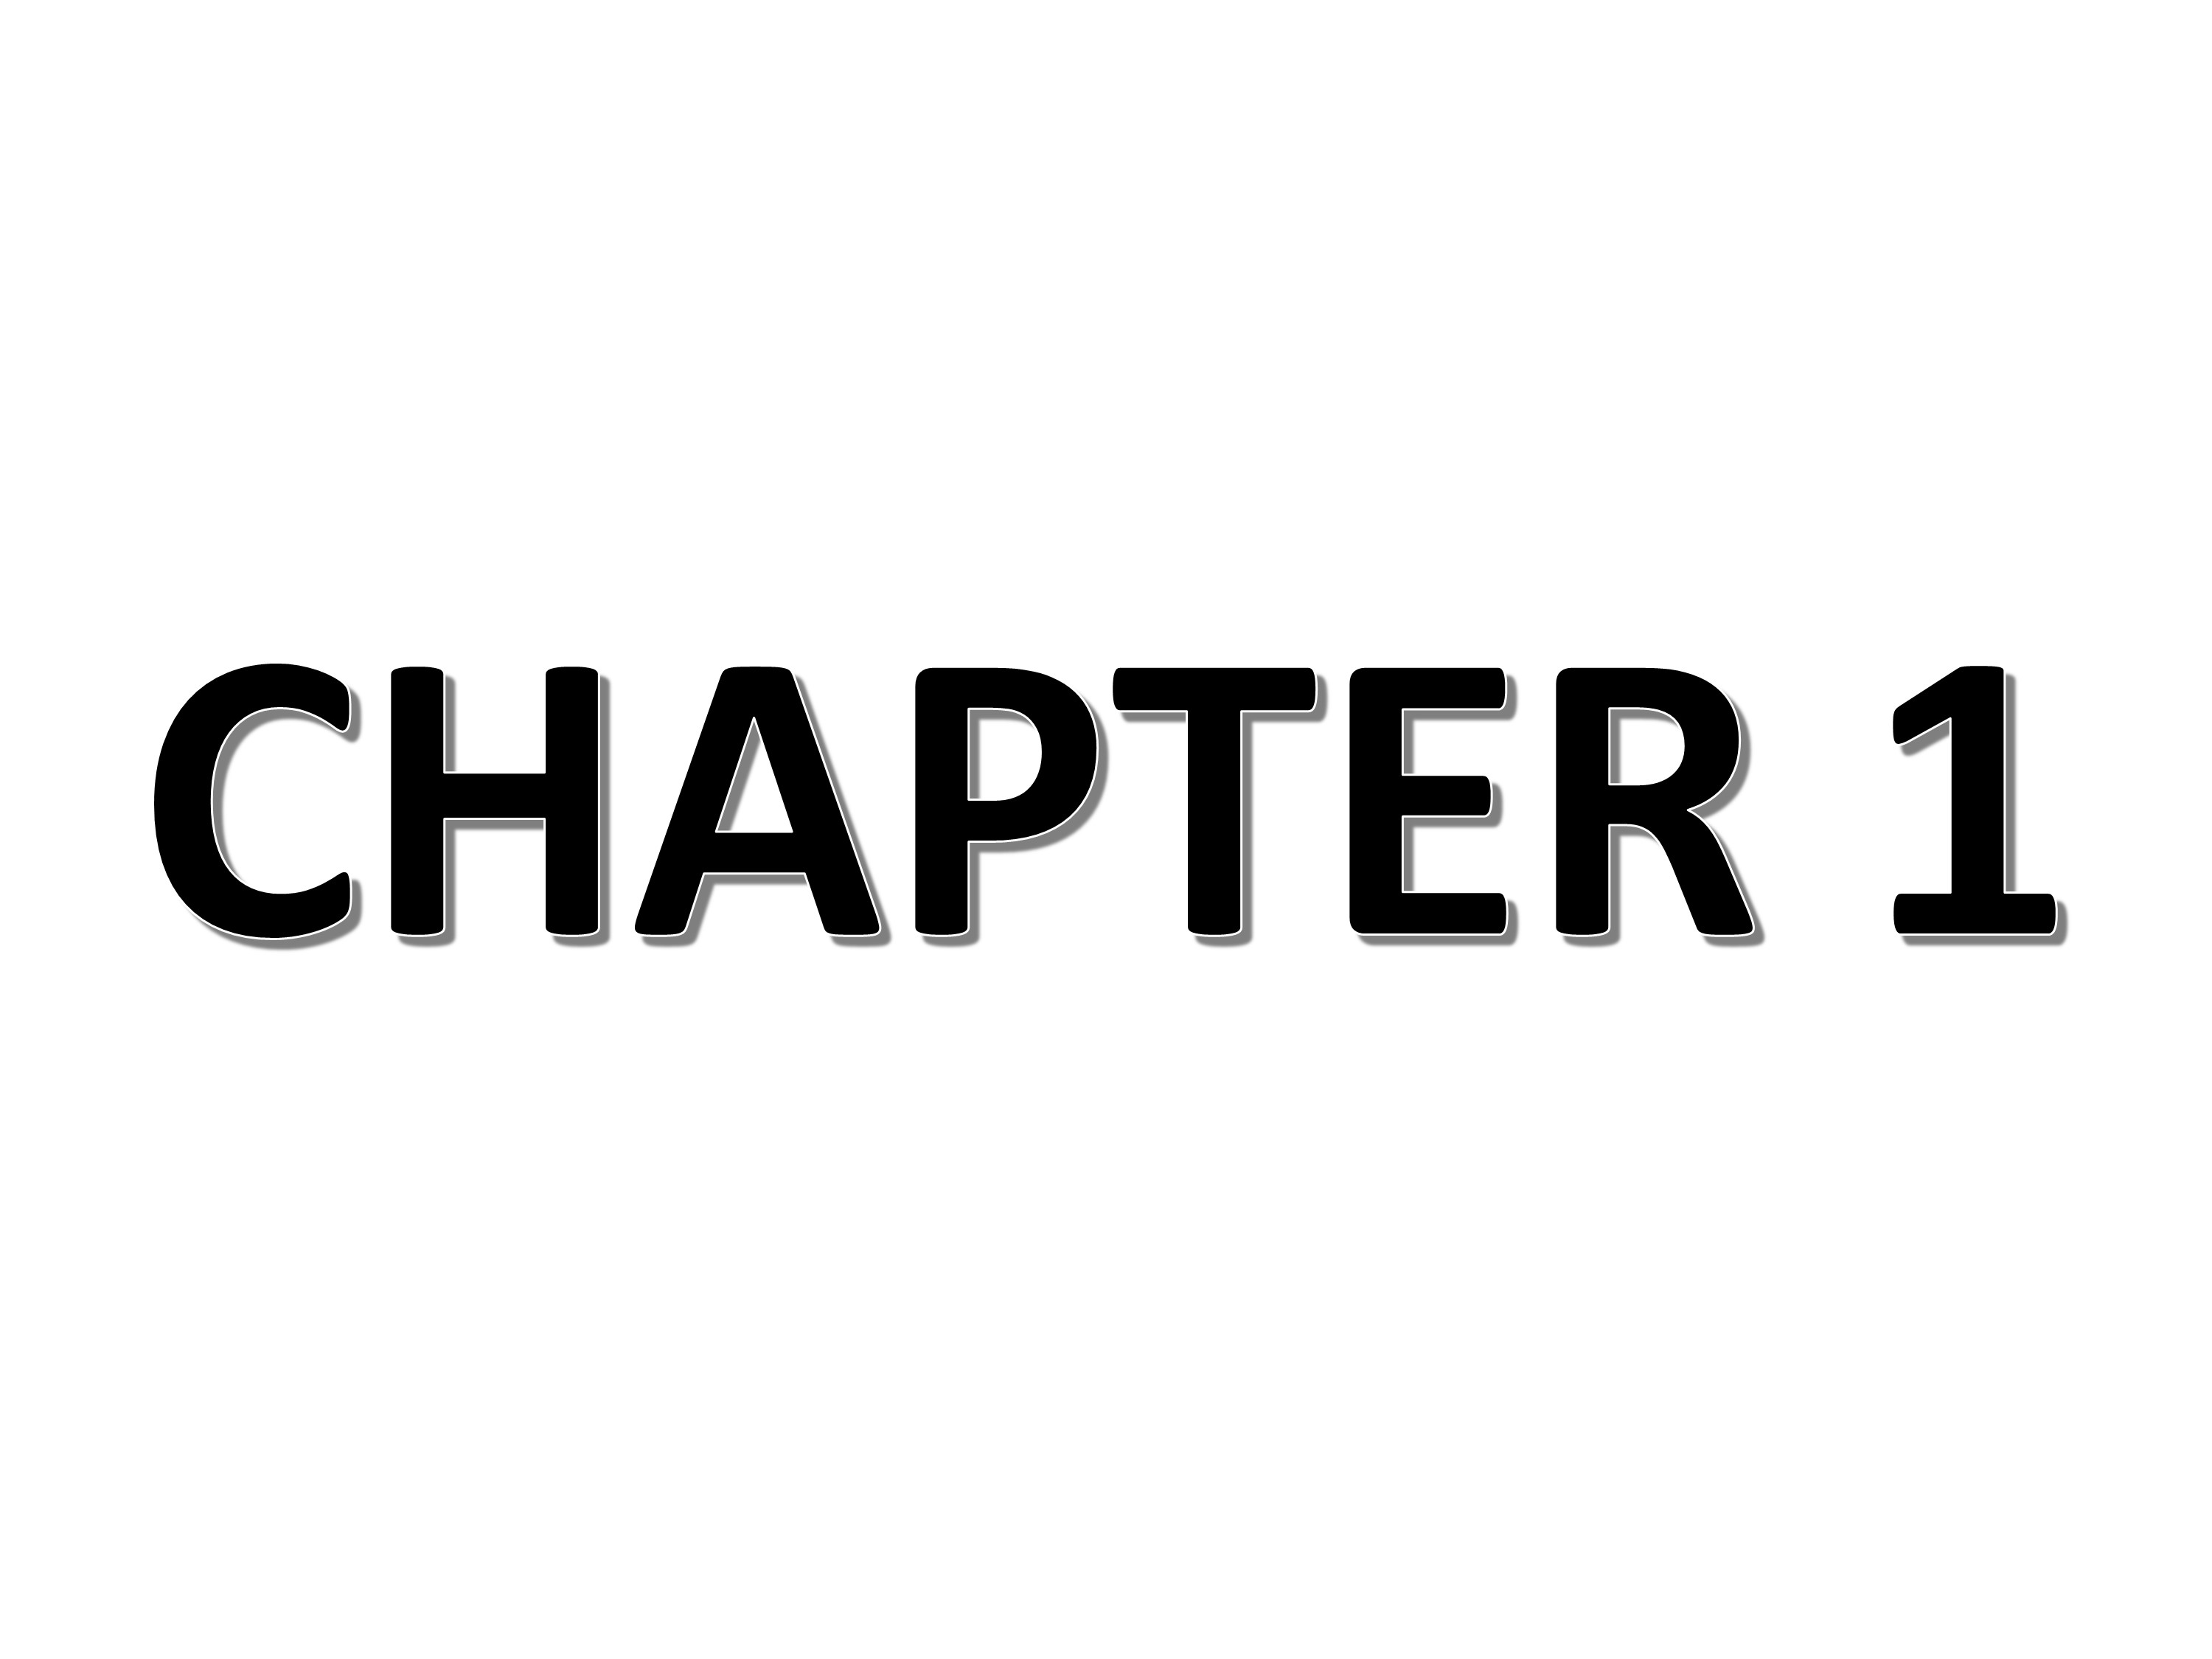 CHAPTER 1 INTRODUCTION